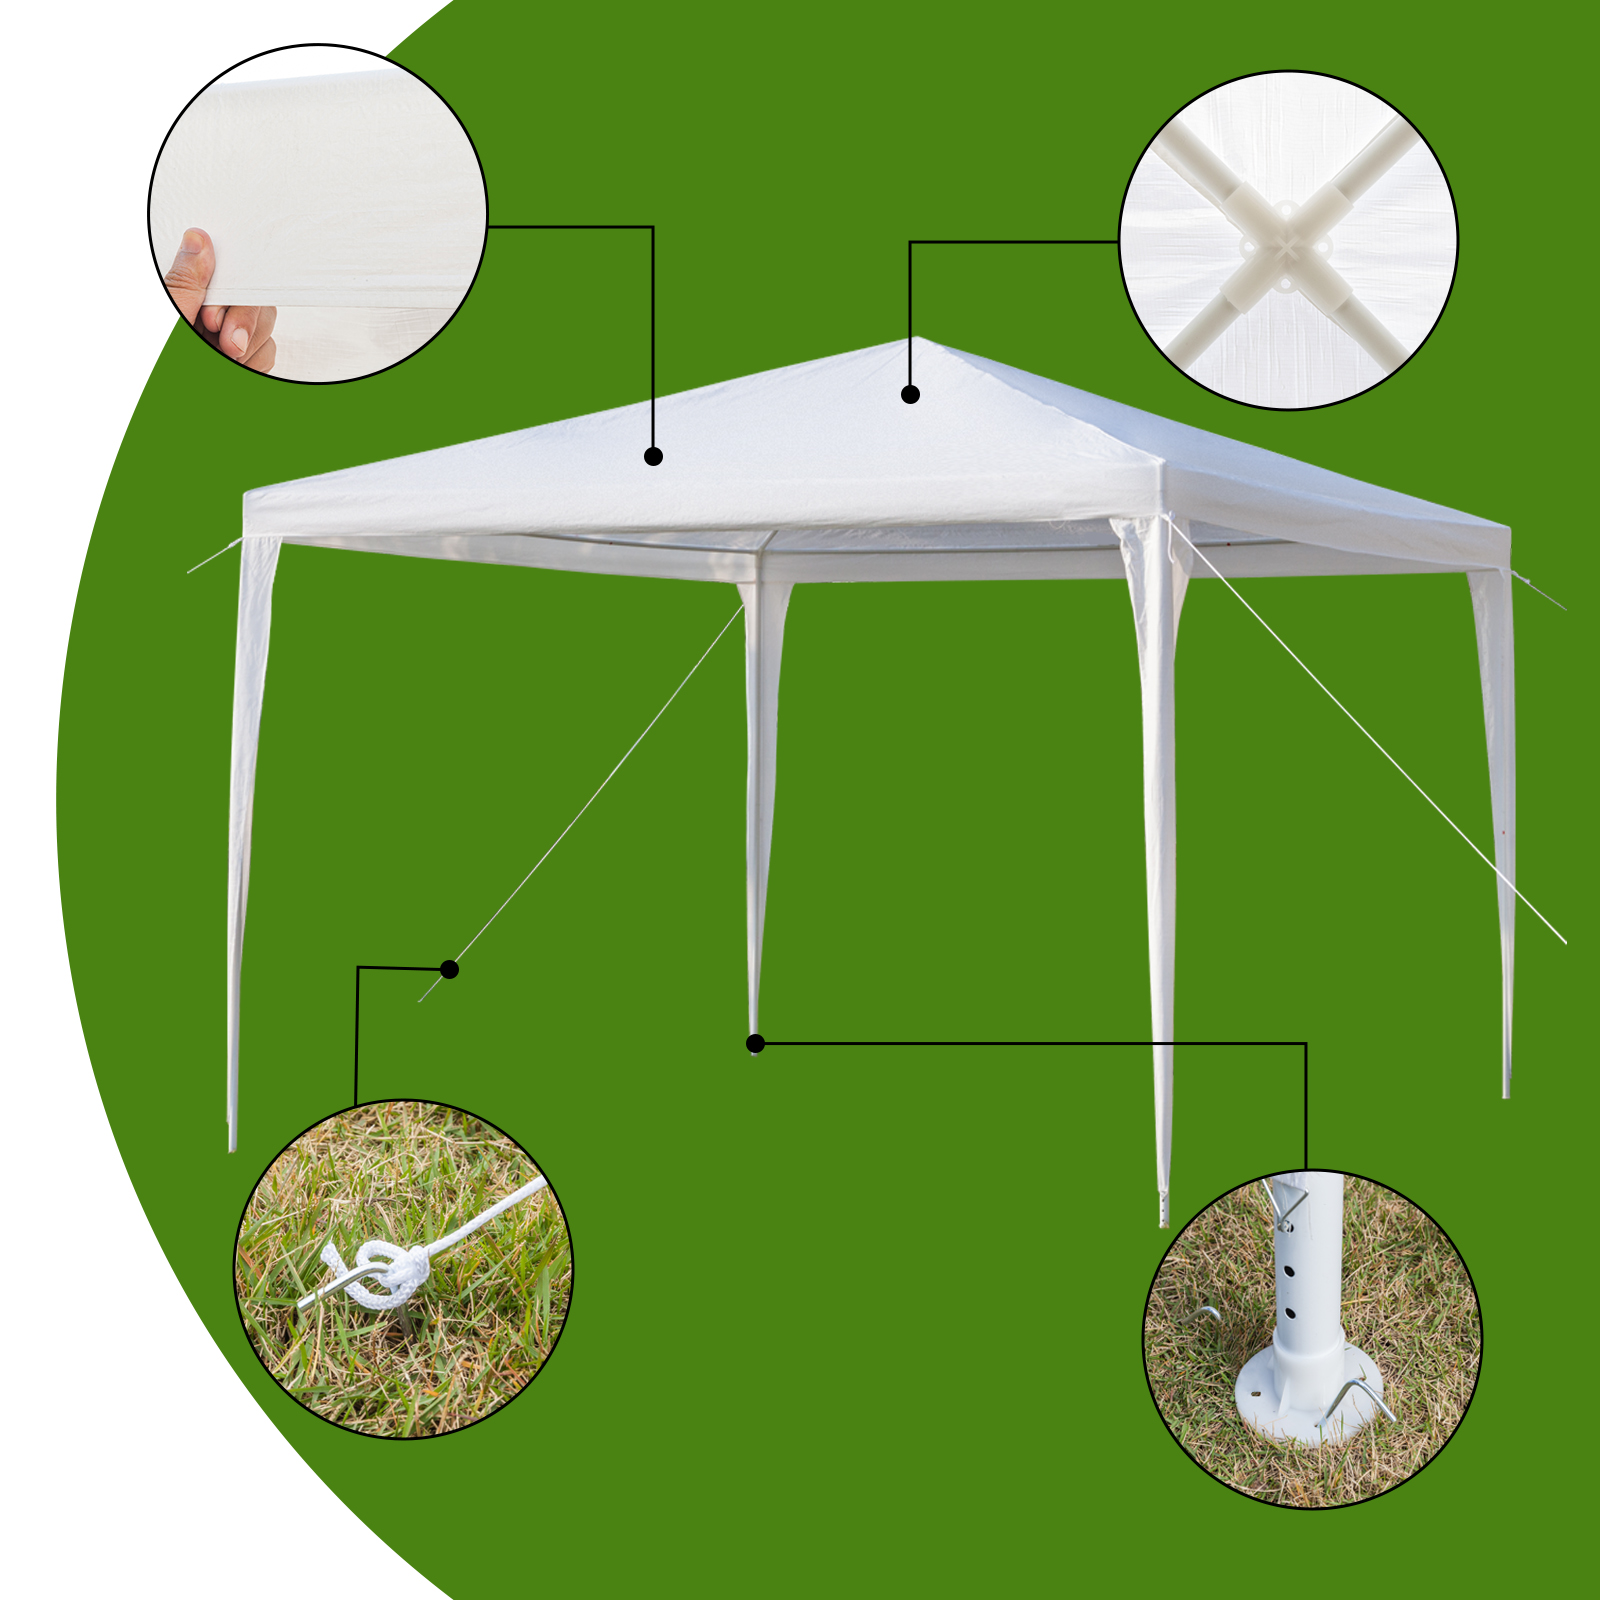 UBesGoo 10' x 10' Canopy Waterproof Party Tent Practical Outdoor Tent for Parties White - image 5 of 9